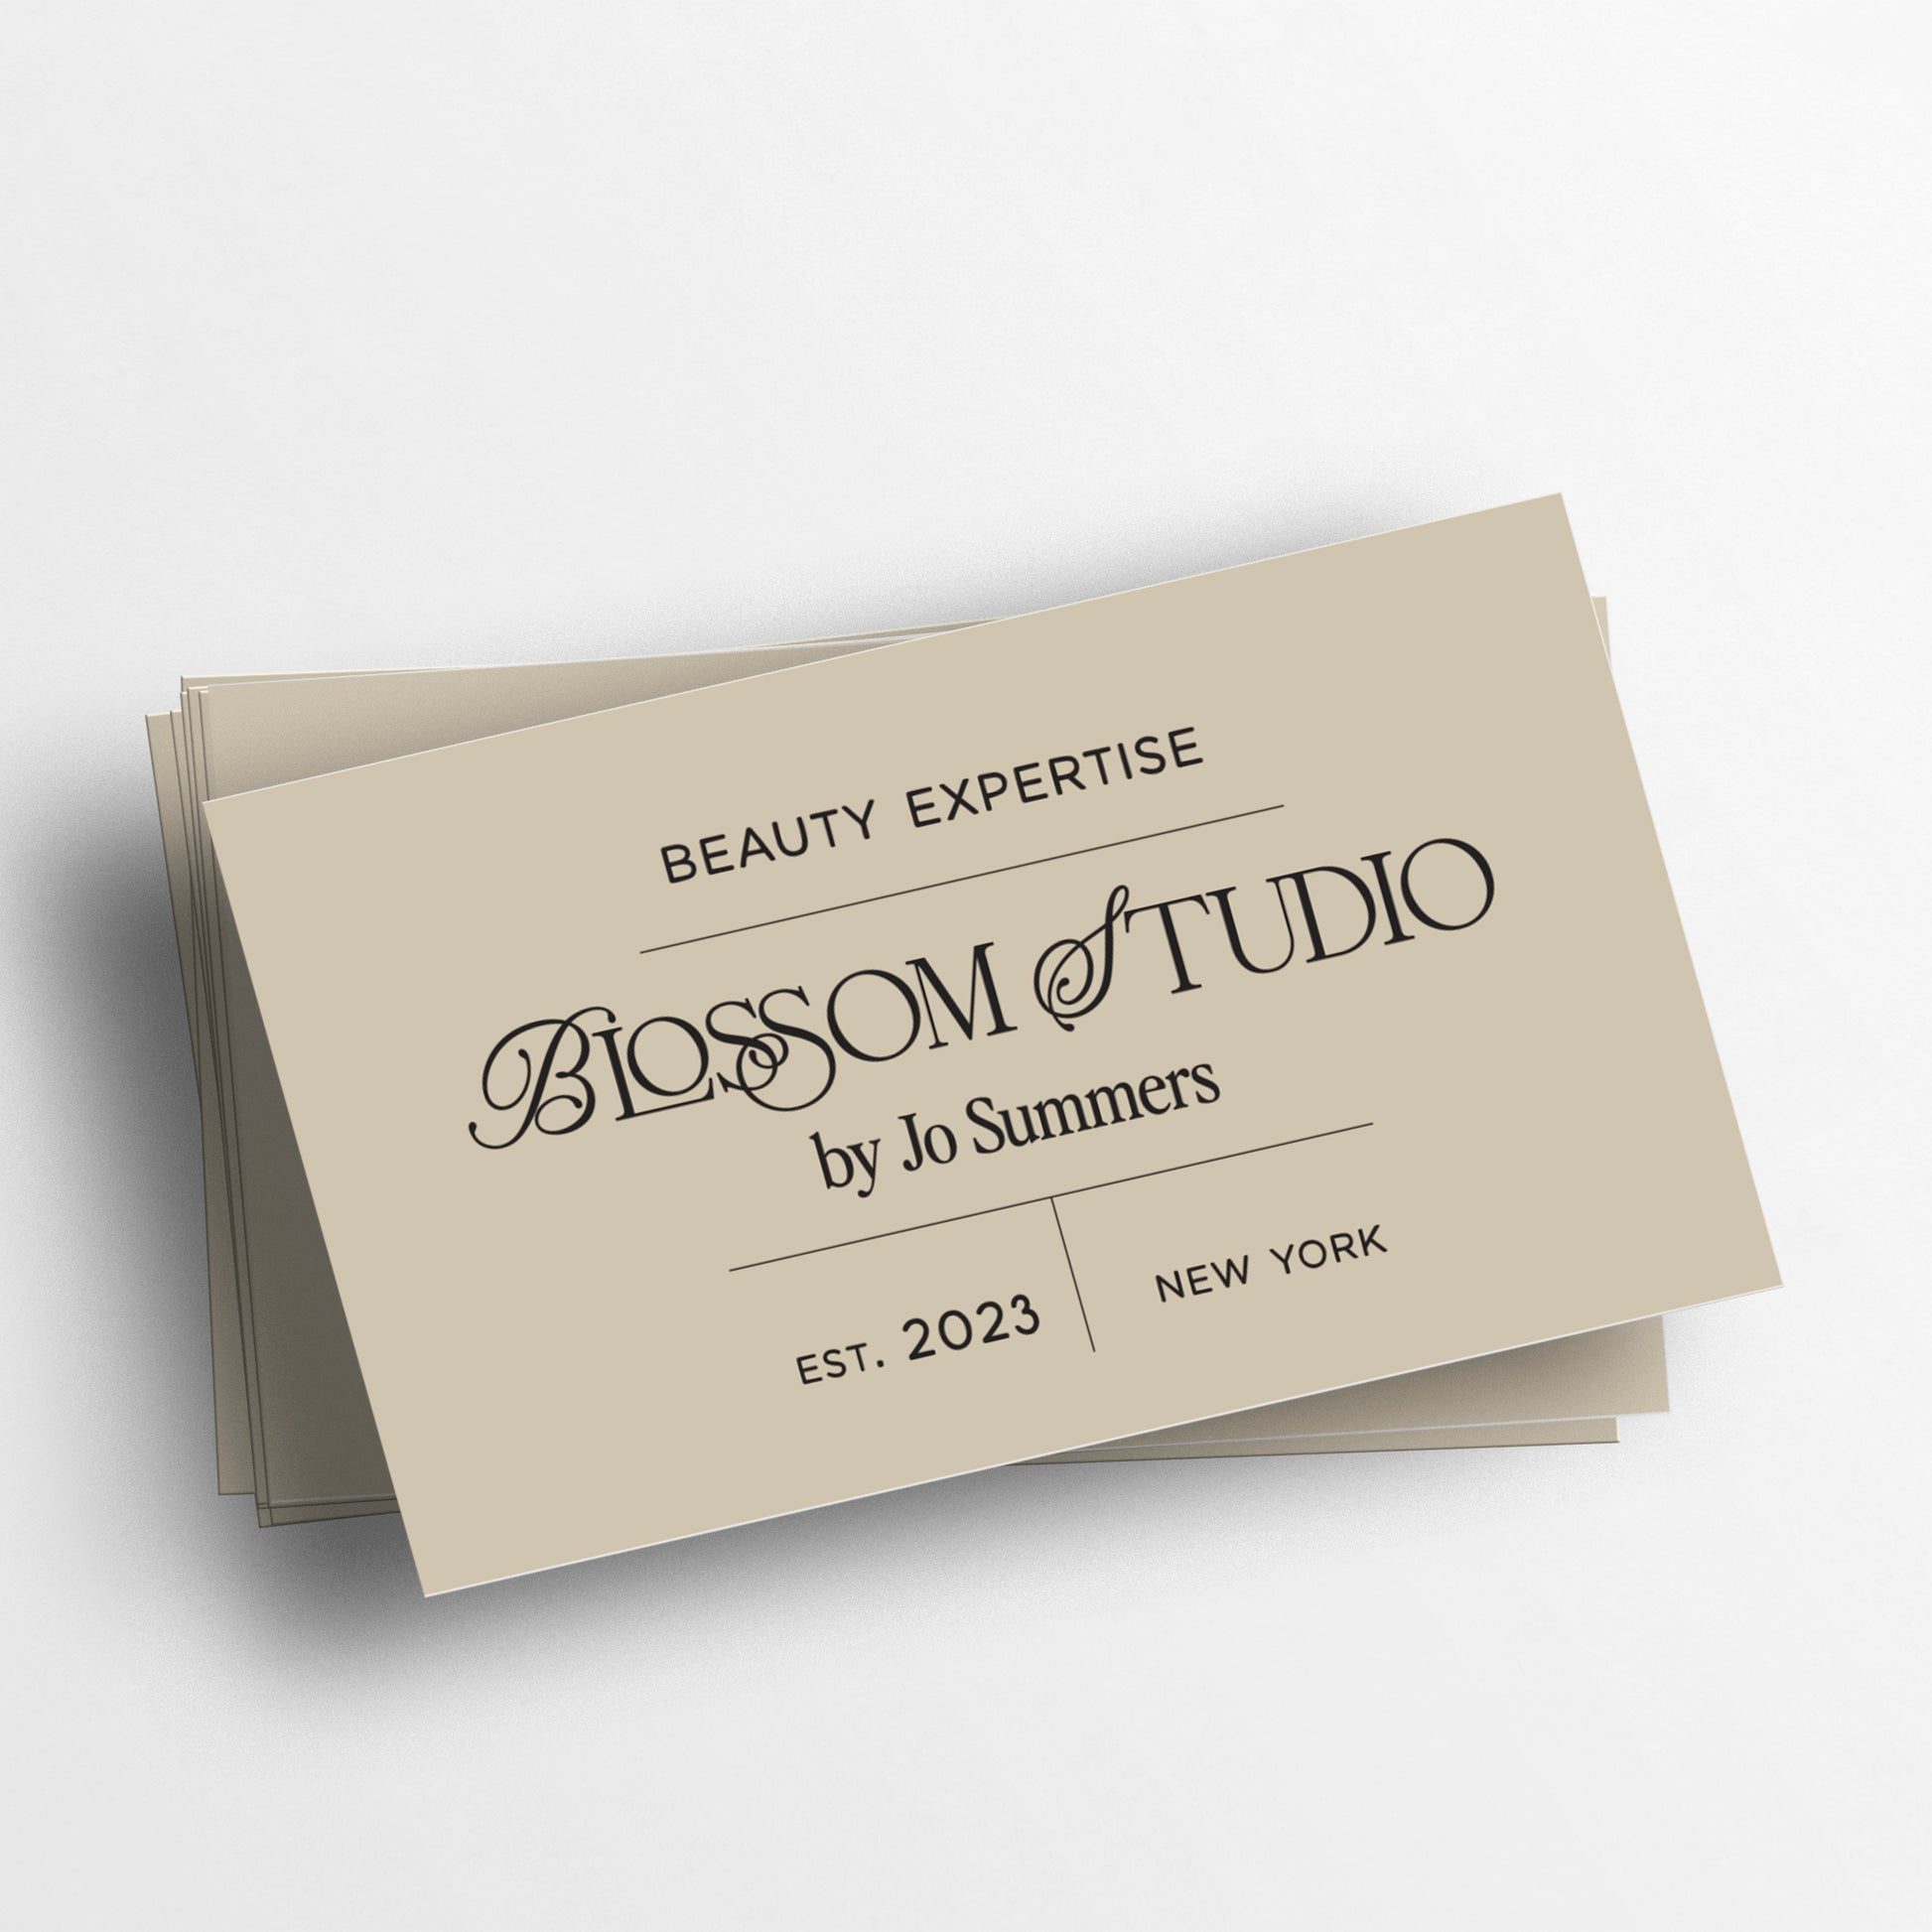 custom small business cards in beige with calligraphy designs - XOXOKristen